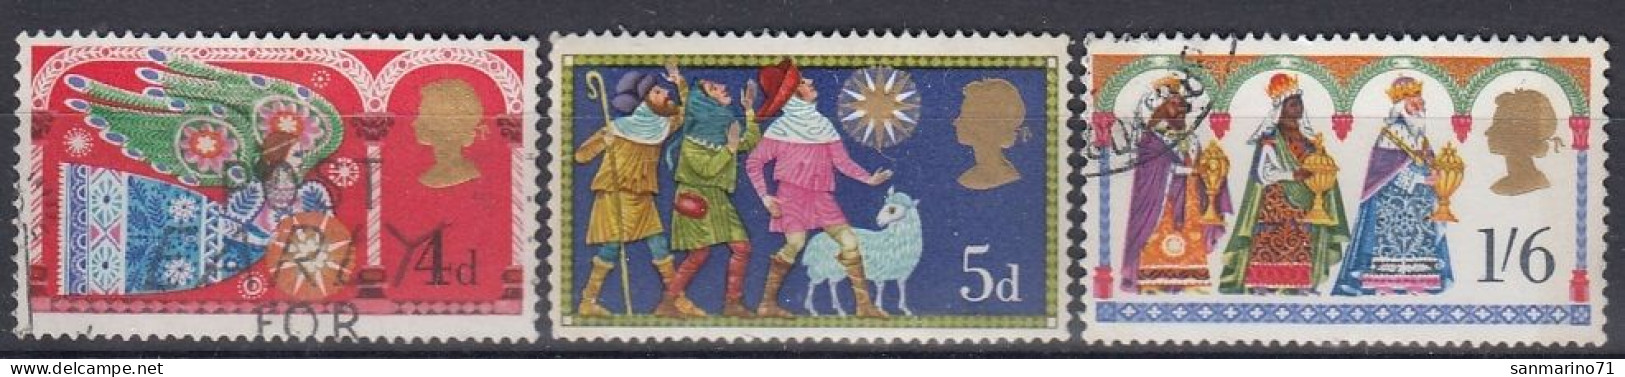 GREAT BRITAIN 532-534,used - Christmas